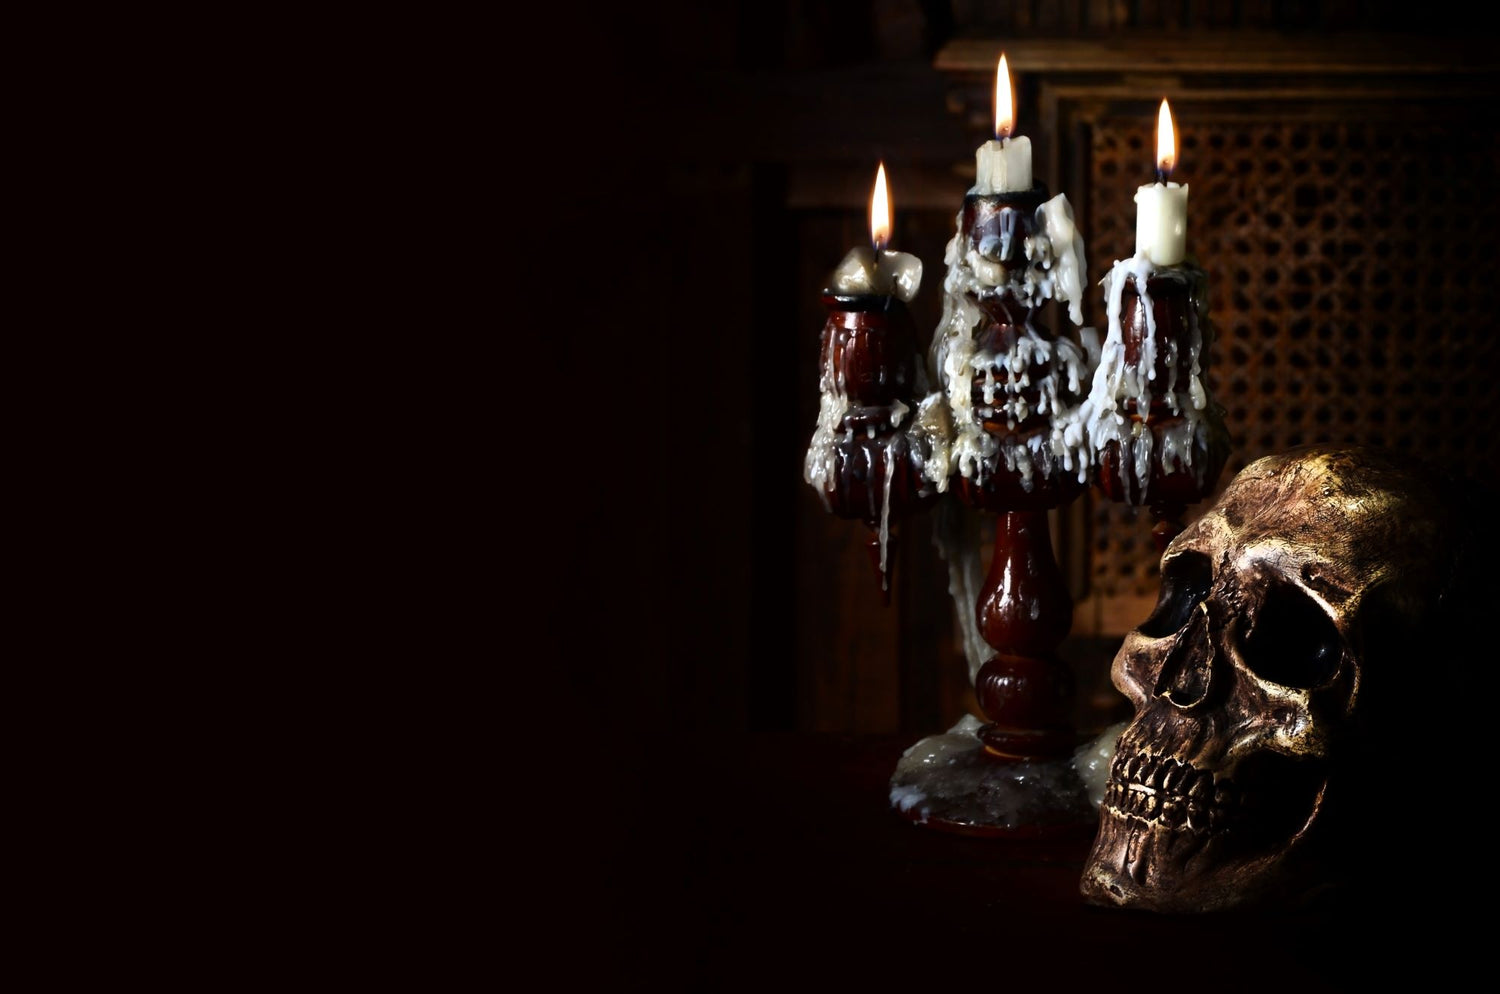 A goth inspired scene on a dark background with a skull and candles